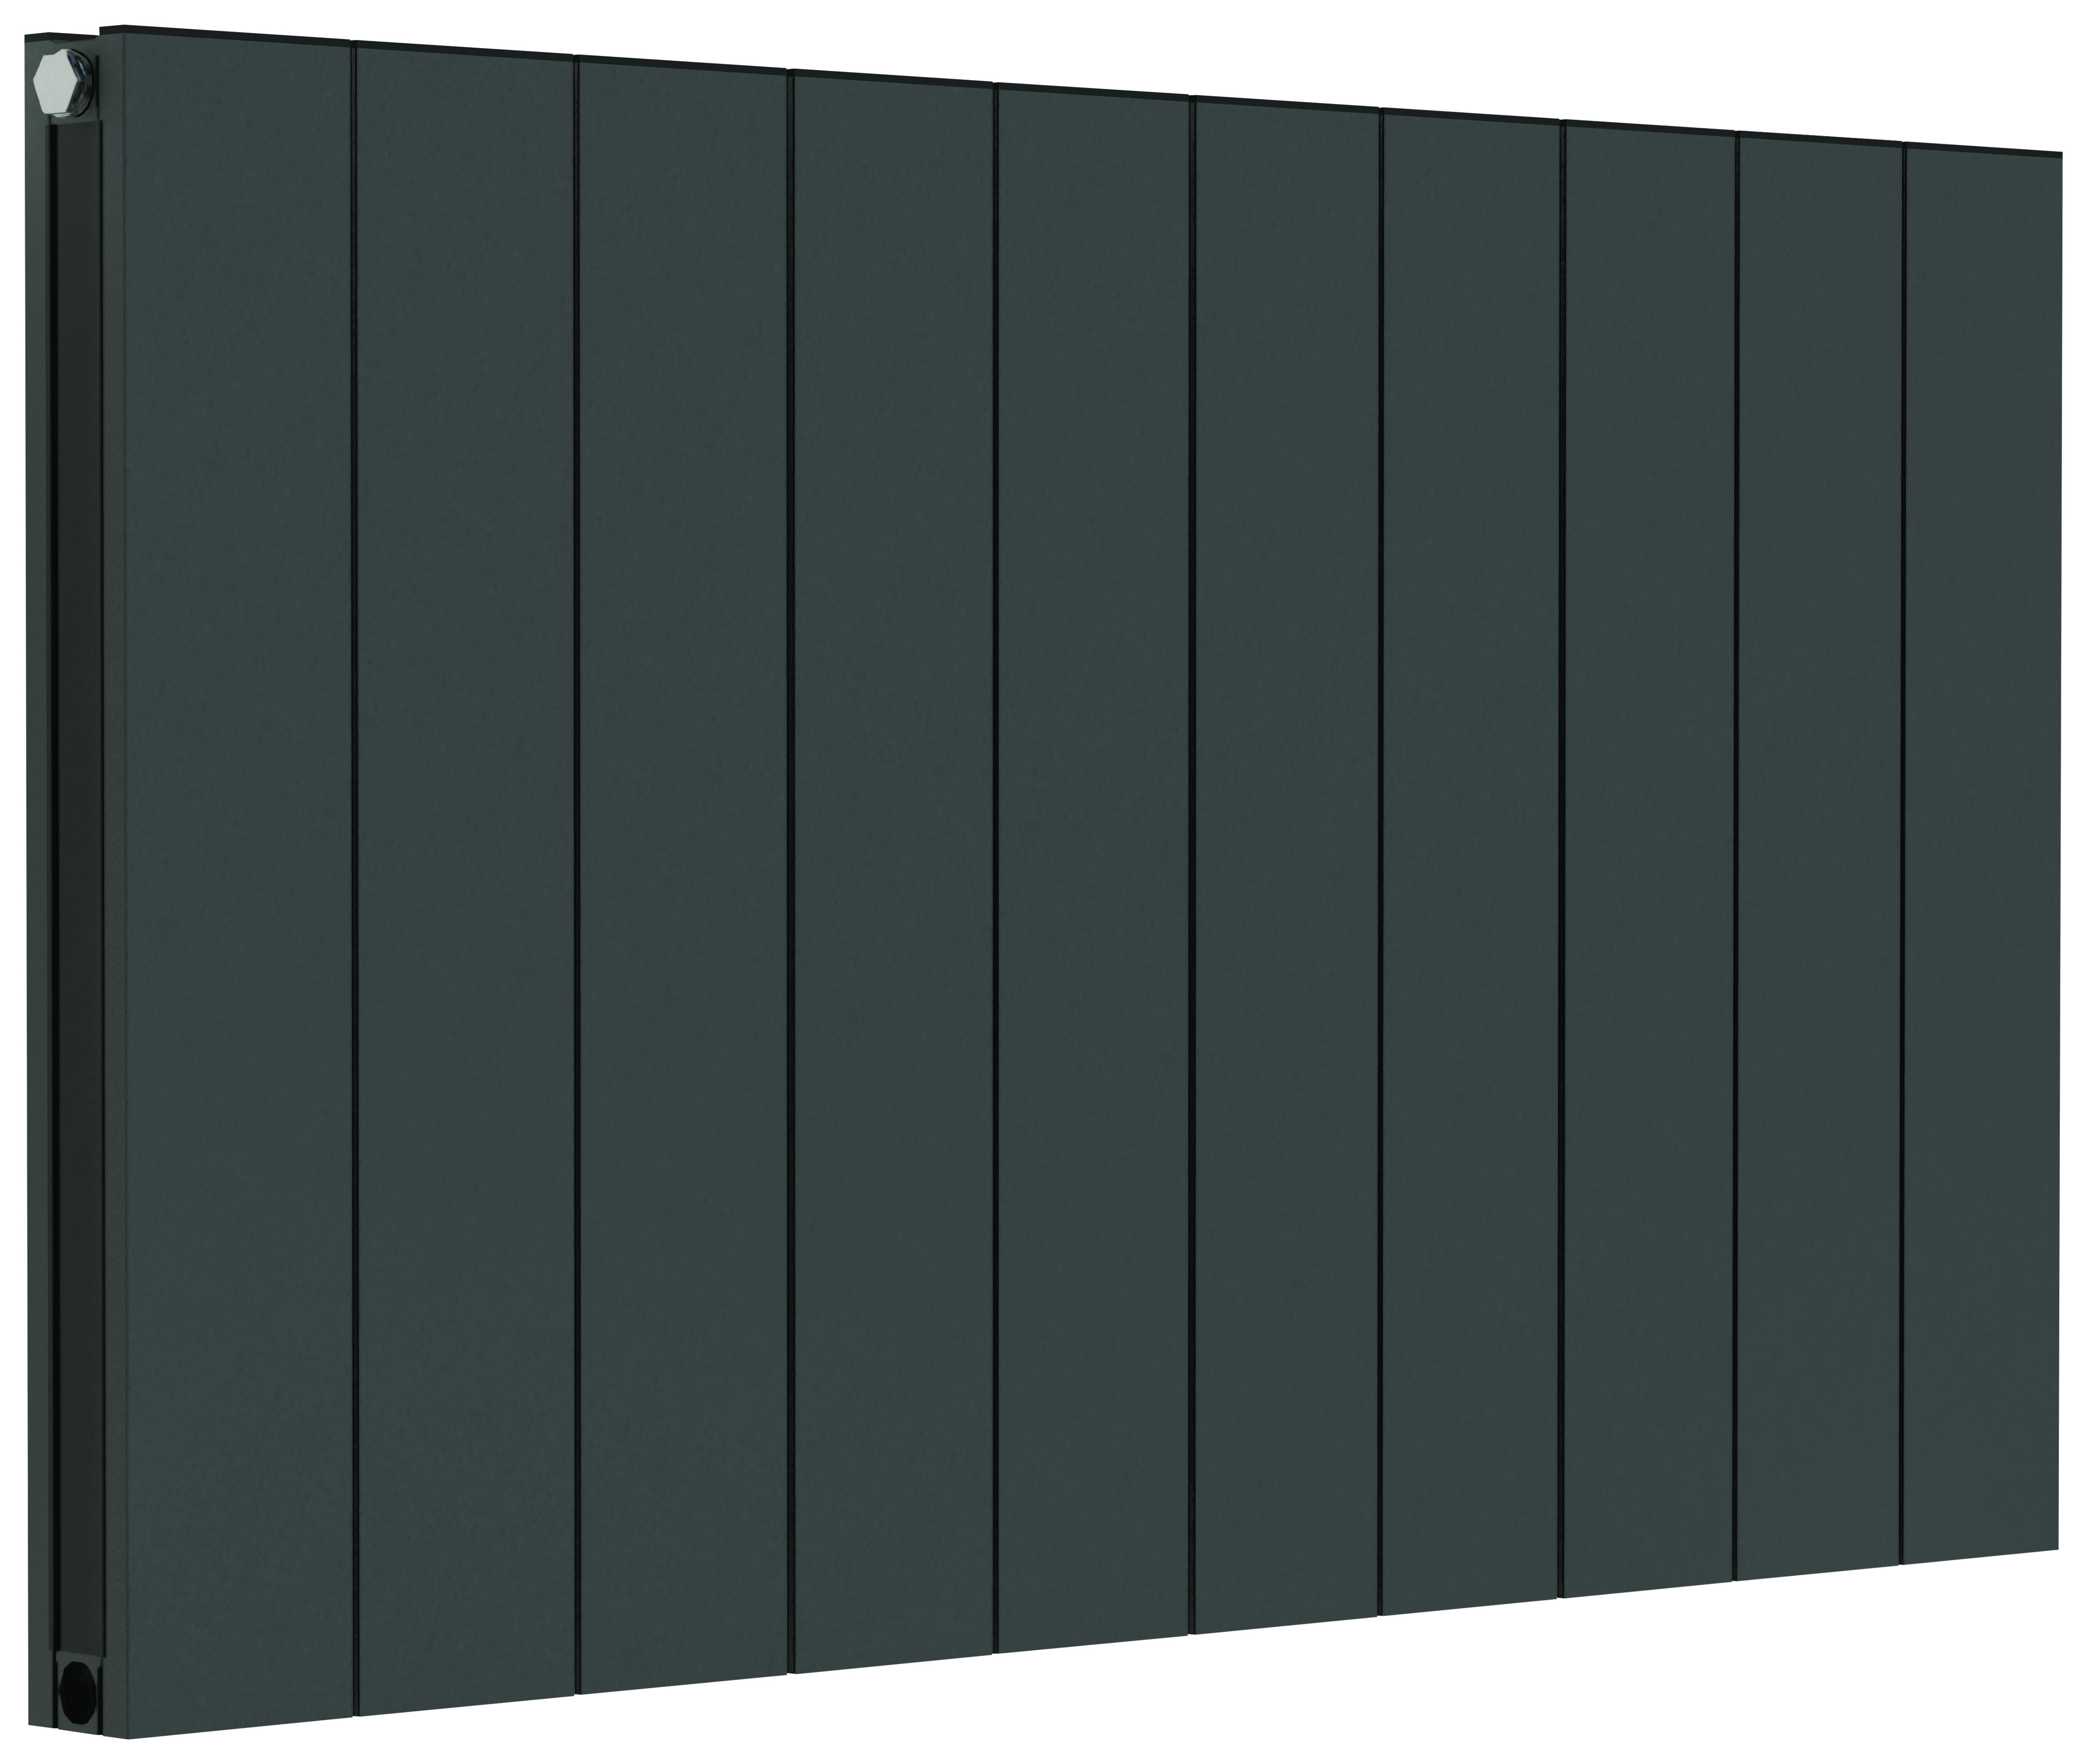 Towelrads Ascot Double Vertical Designer Radiator - Anthracite 600mm - Various Widths Available